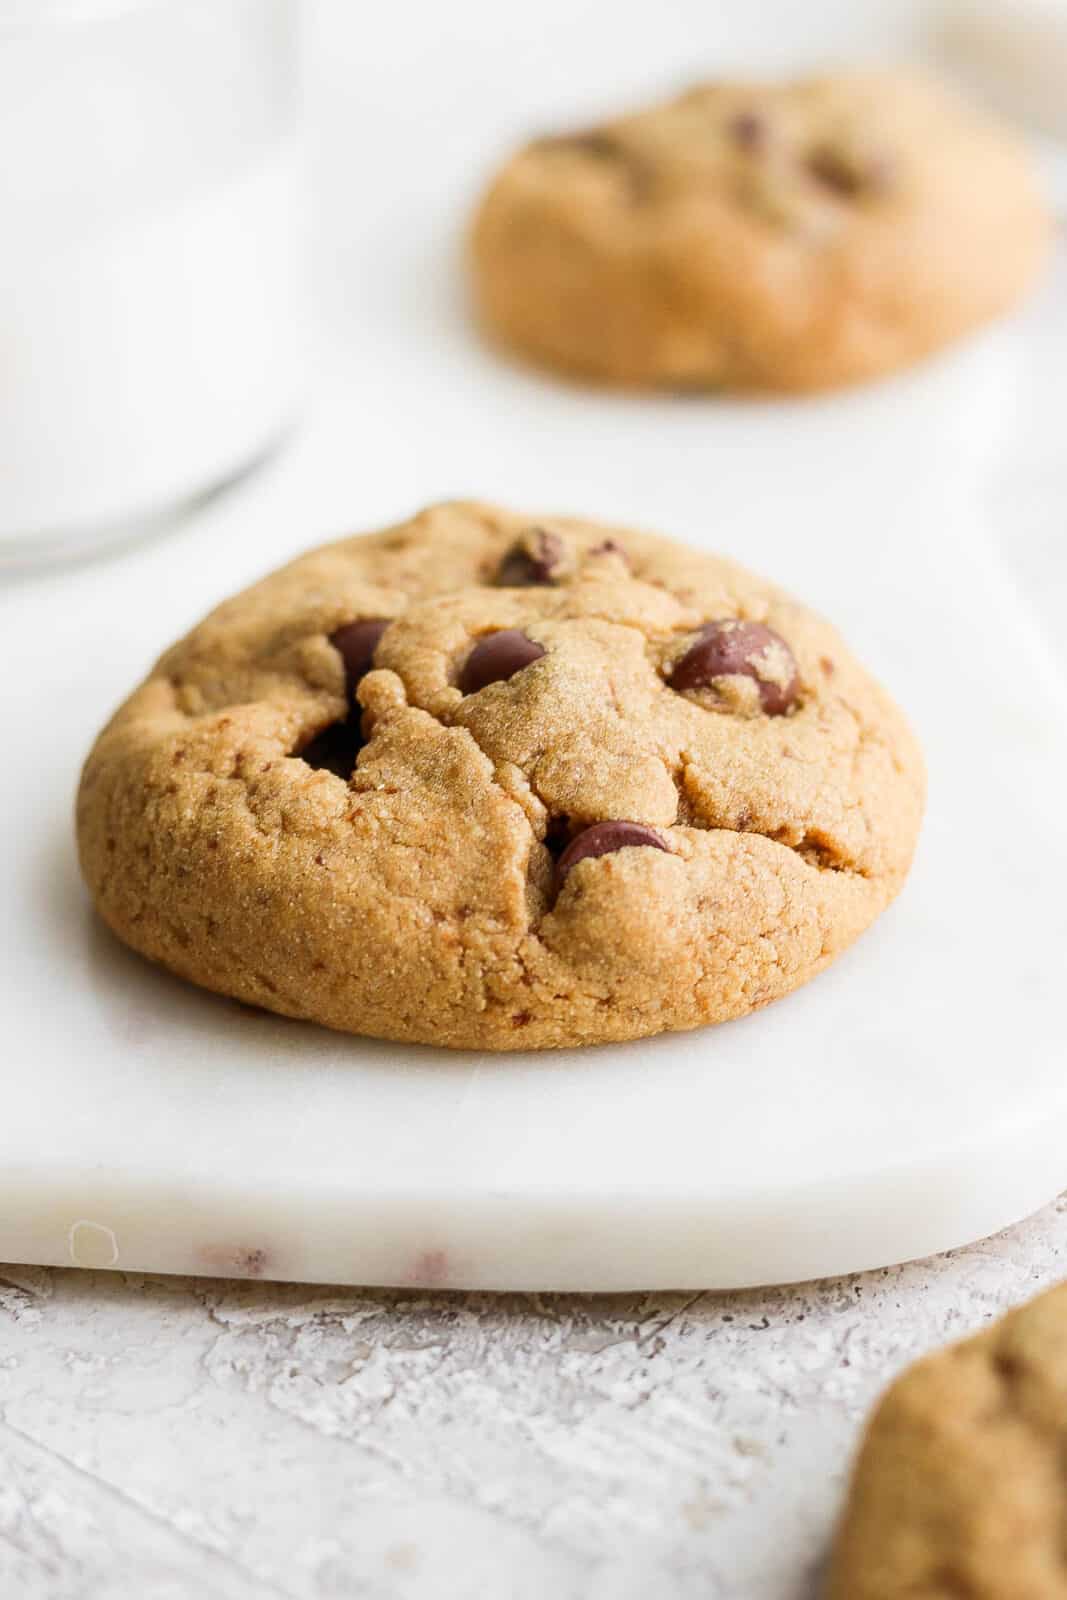 A paleo chocolate chip cookie.